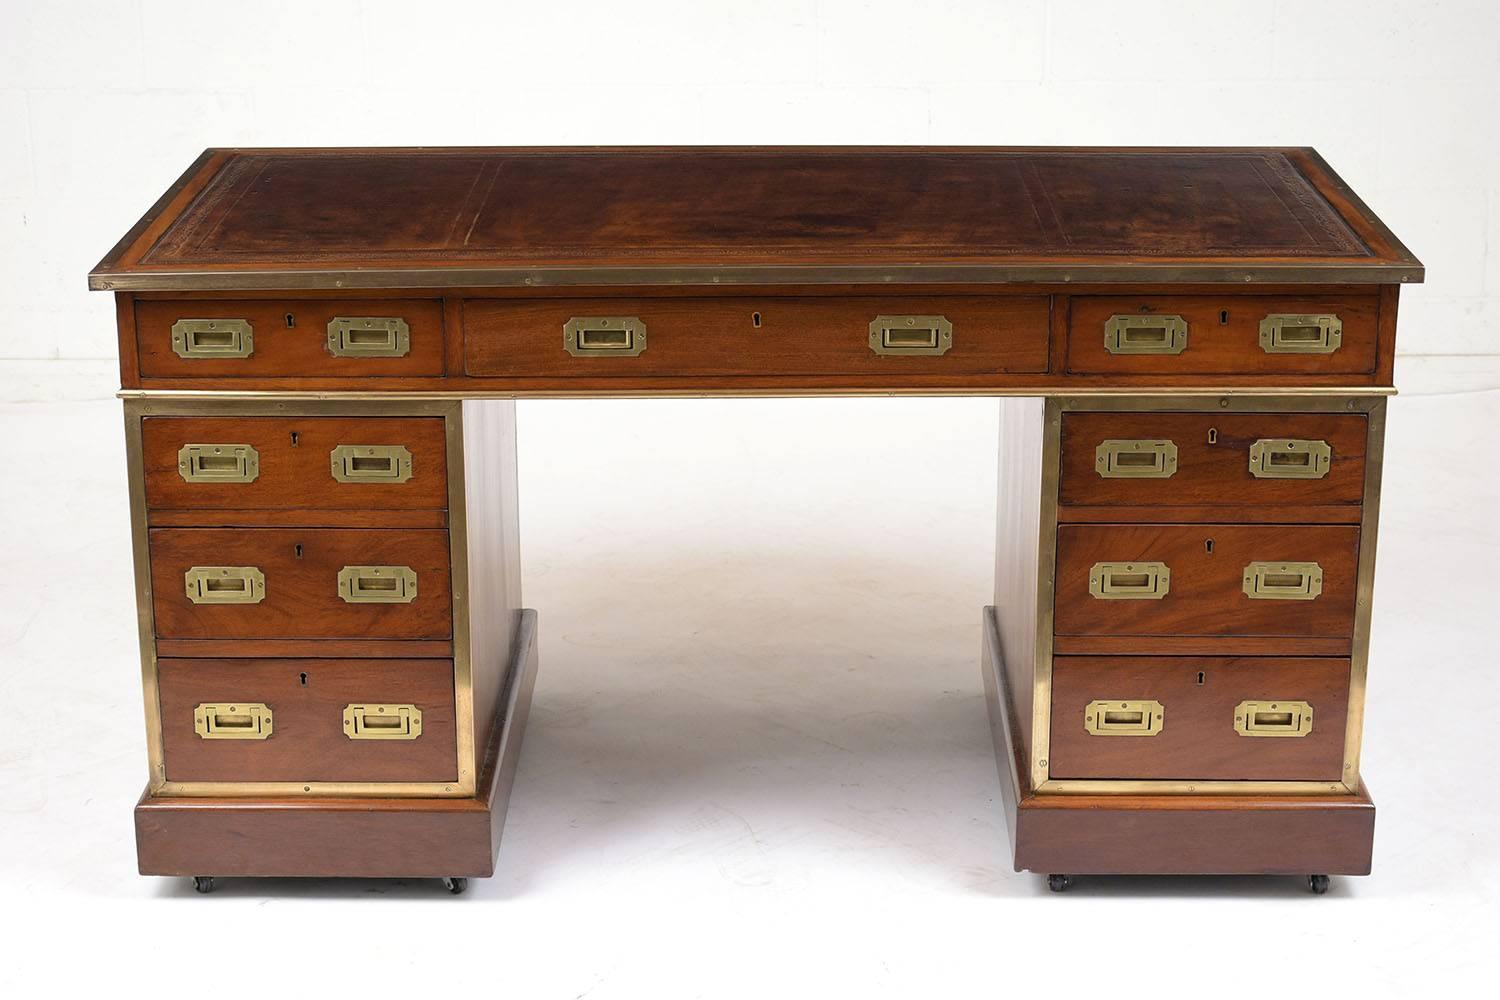 This 1900s English Campaign style pedestal desk is made of mahogany wood stained a light walnut color with a polished finish. The desk has nine drawers (four drawers on each pedestal and one pen drawer in the centre) with flush brass drawer pulls